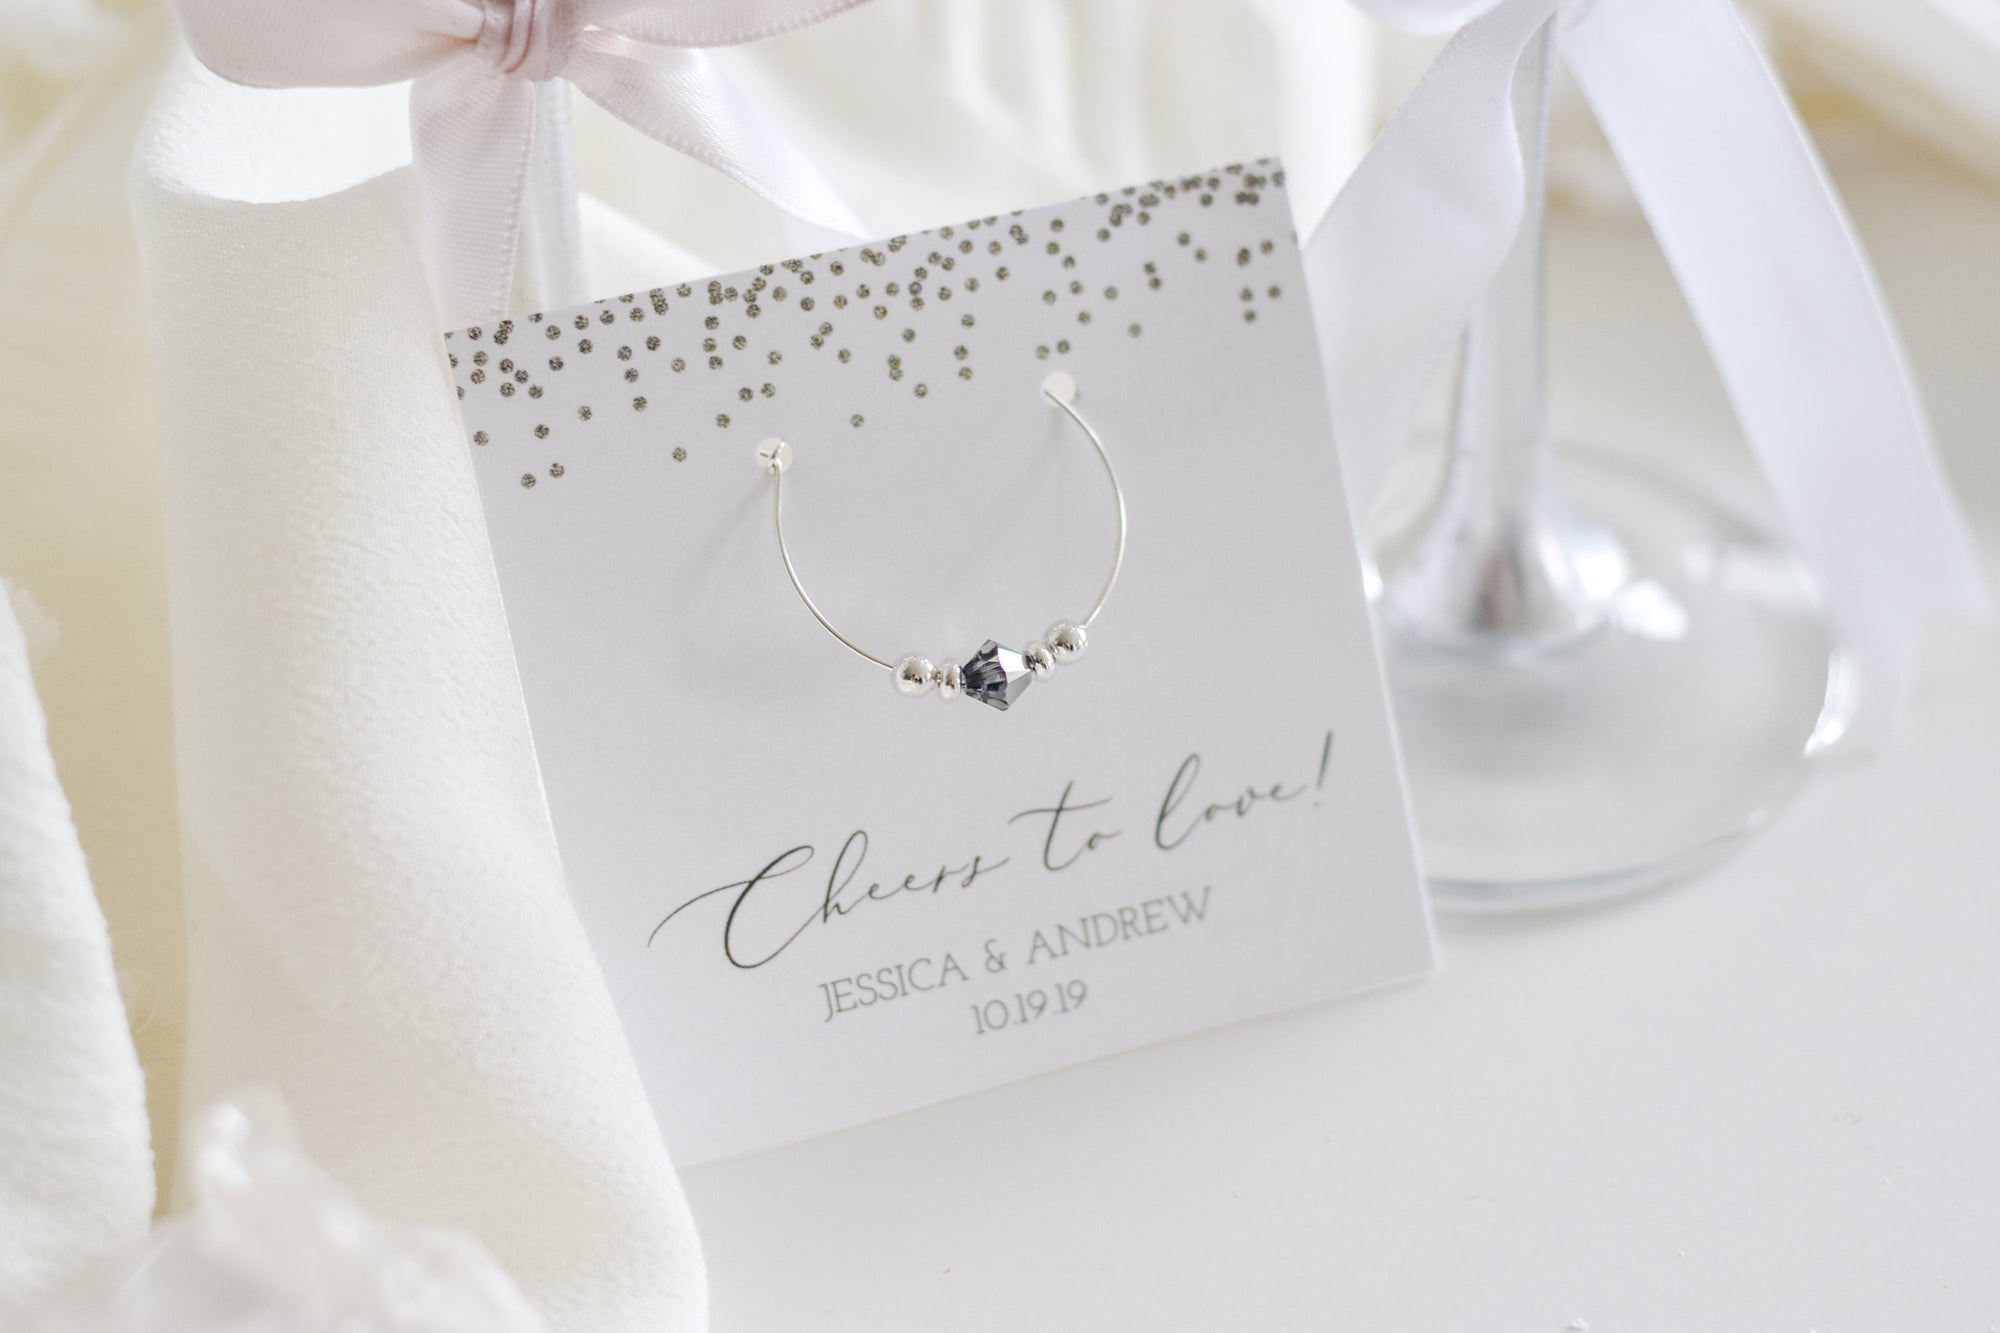 Silver Engagement Party Gifts for Guests, Silver Engagement Party Favors, Elegant Engagement Party Favors Wine Theme, Wine Charms - @PlumPolkaDot 